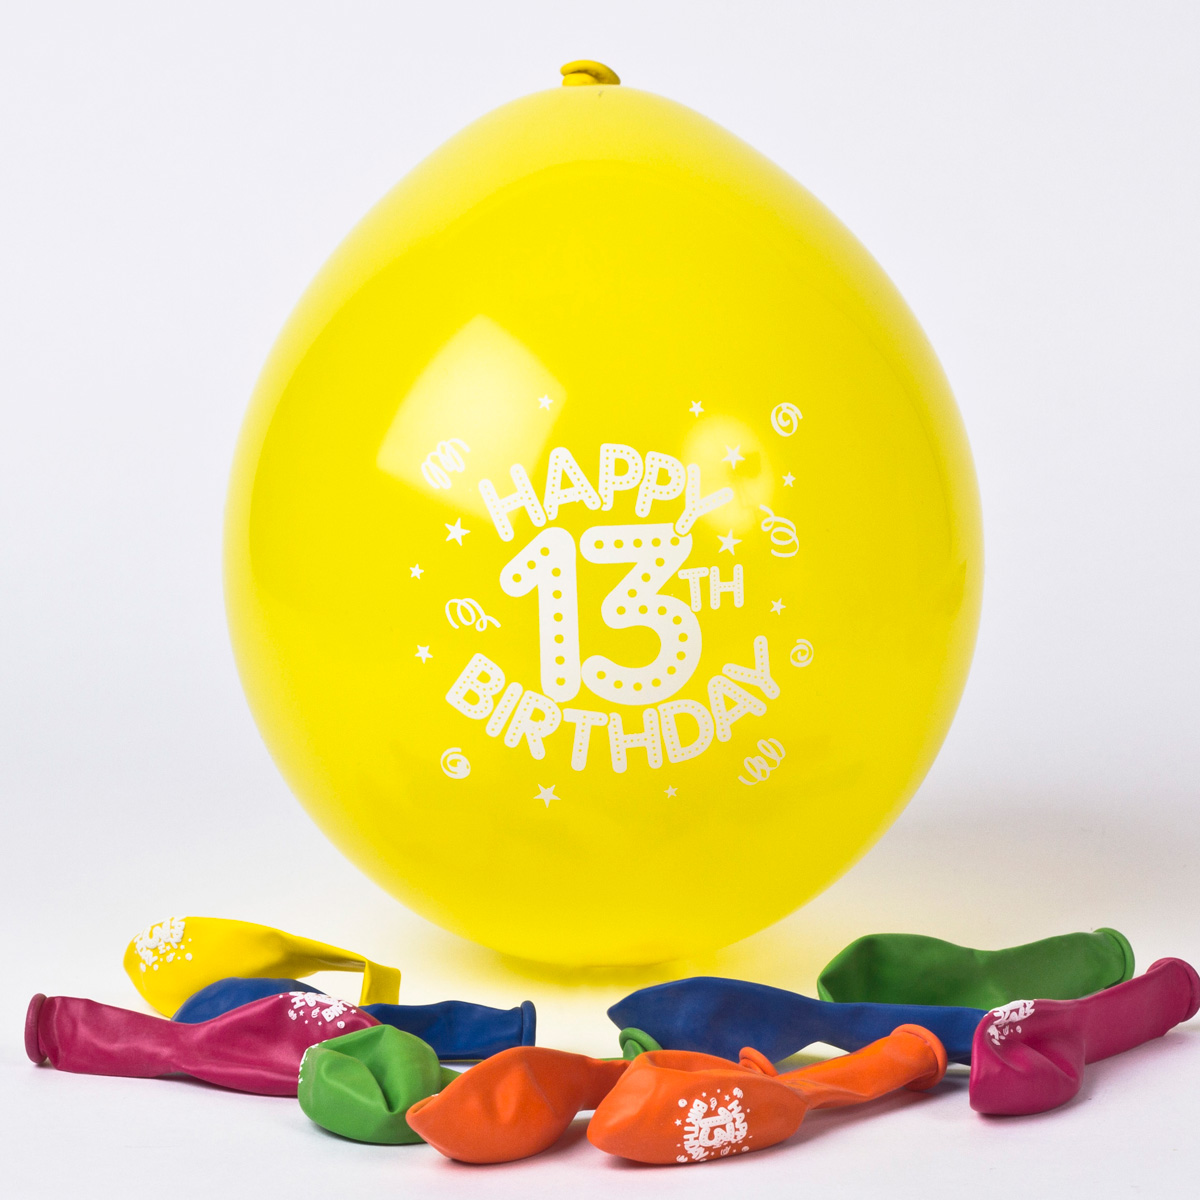 Multicoloured Age 13 Small Latex Balloons, Pack Of 10